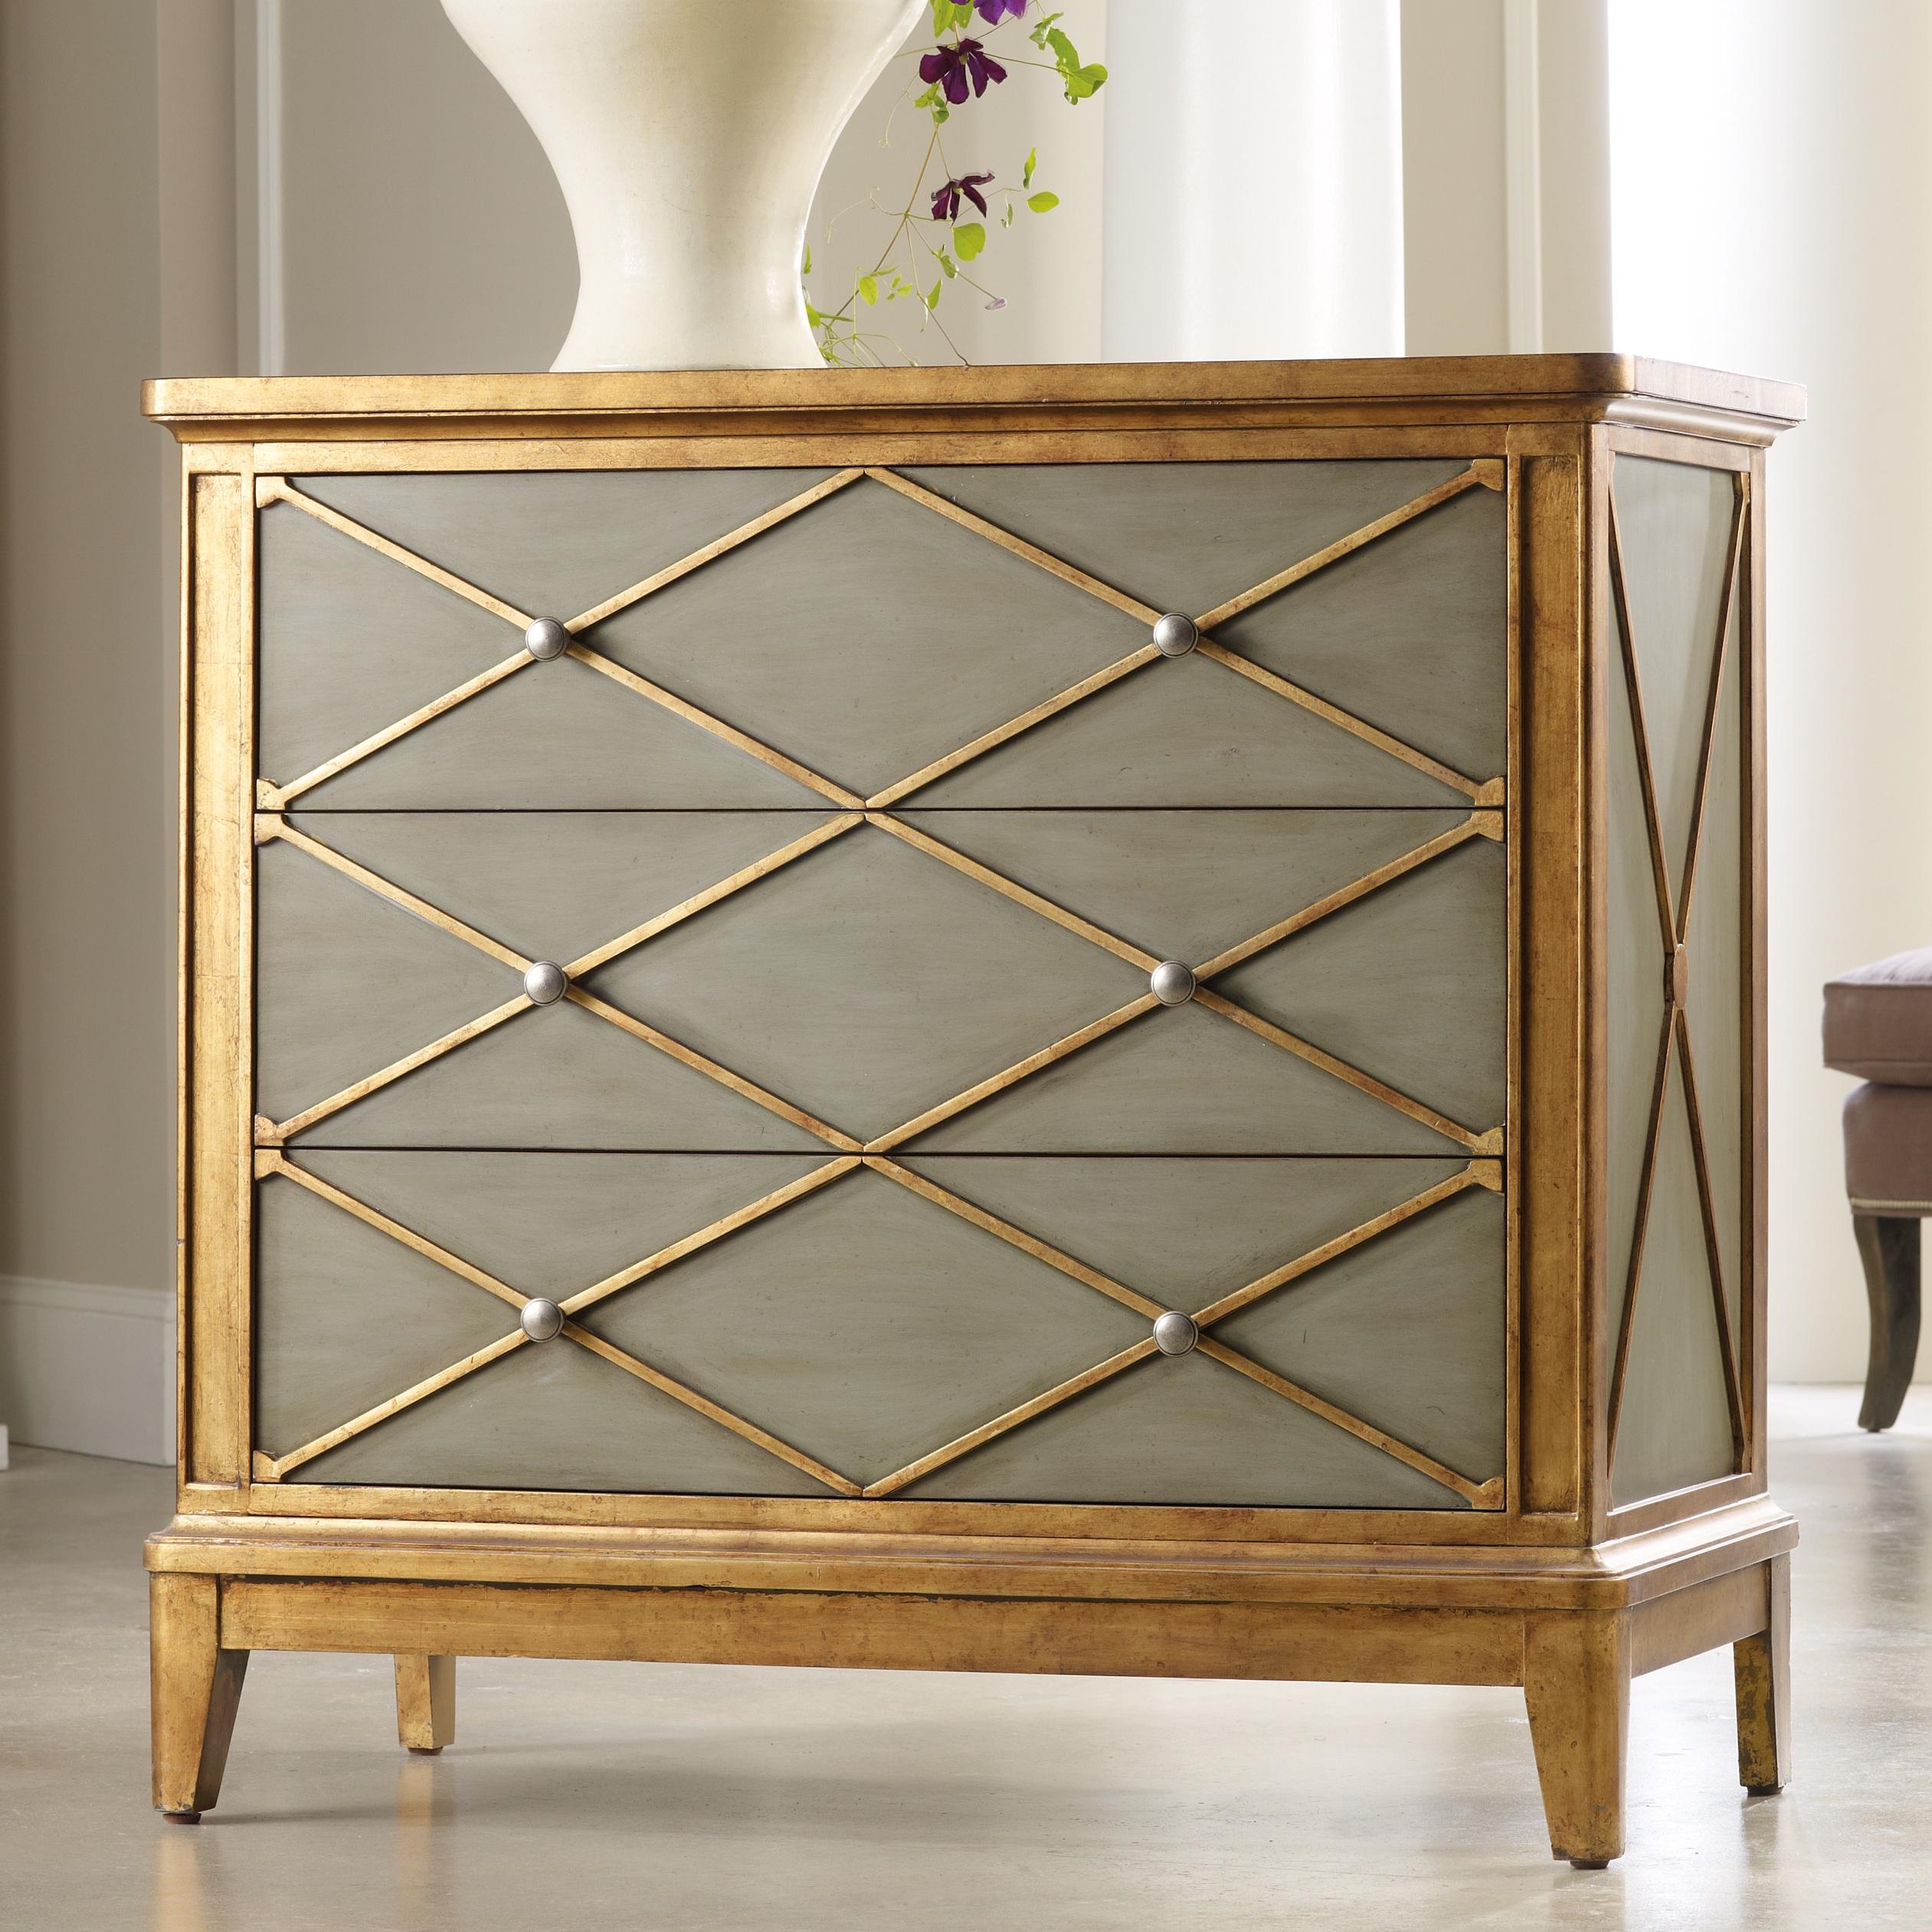 hooker furniture melange paxton gold trim chest with drawers products color accent tables and chests ahfa occasional cabinet locator small tall white table unusual bedside lamps